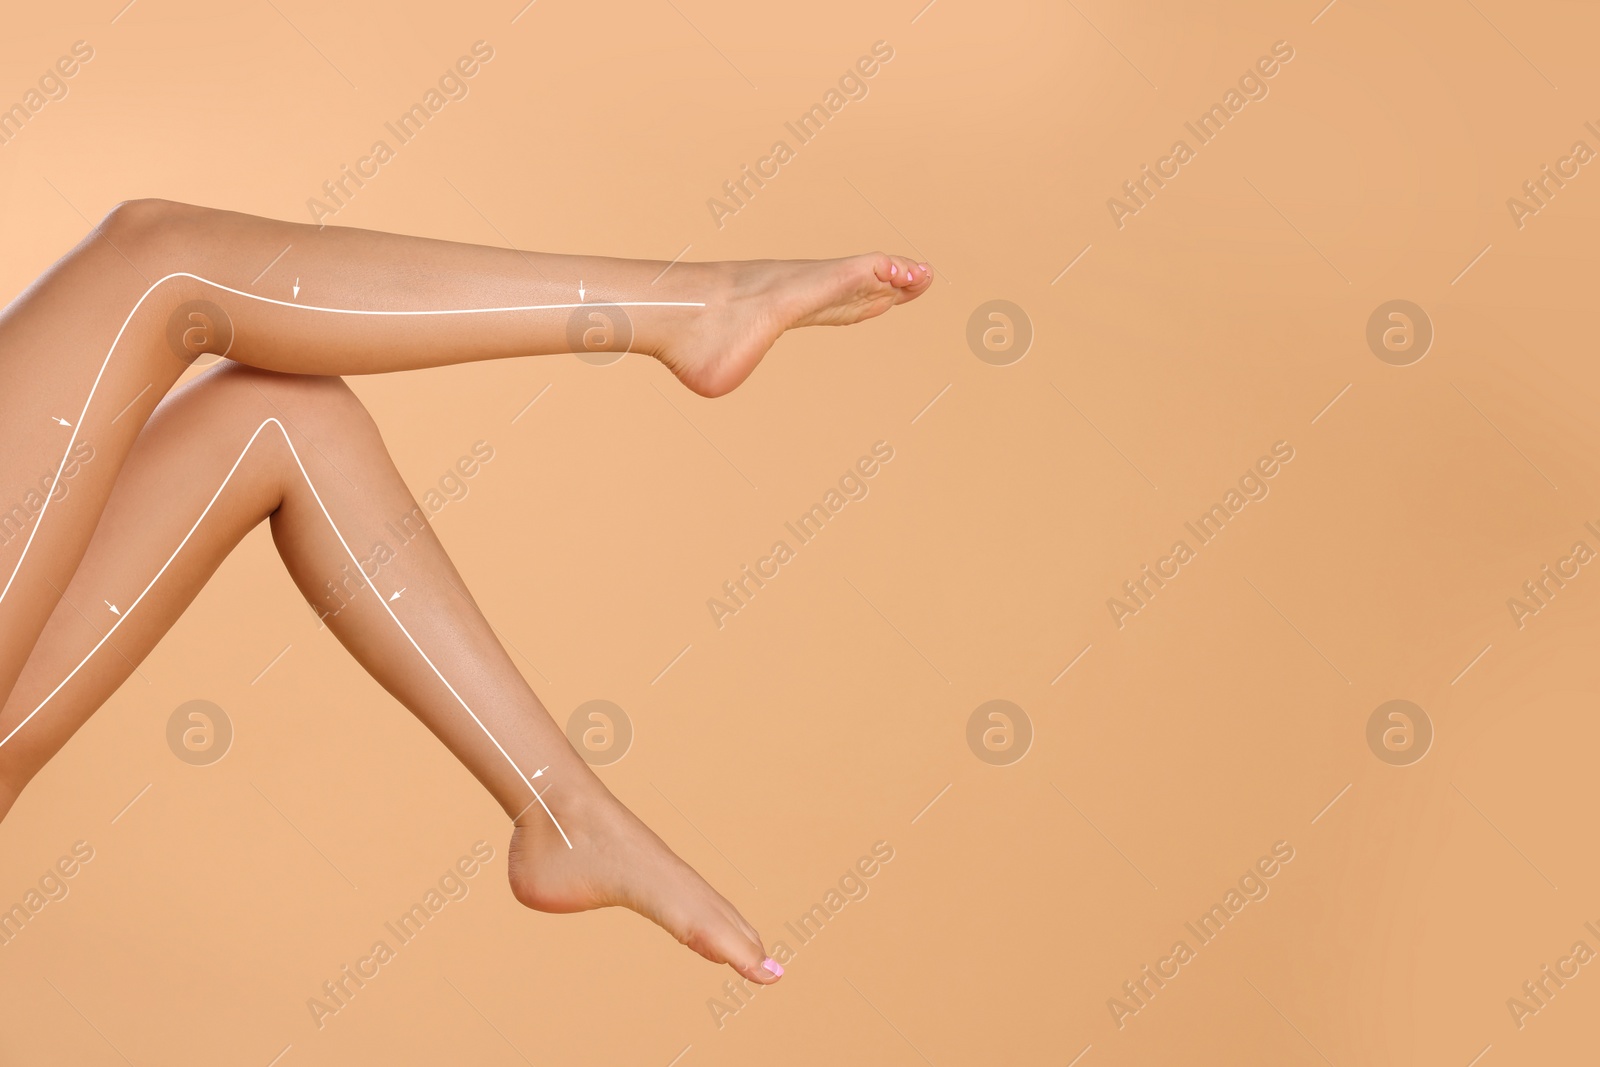 Image of Epilation guide - how to remove hair in proper direction. Woman with drawn lines and arrows on her beautiful smooth legs against pale orange background